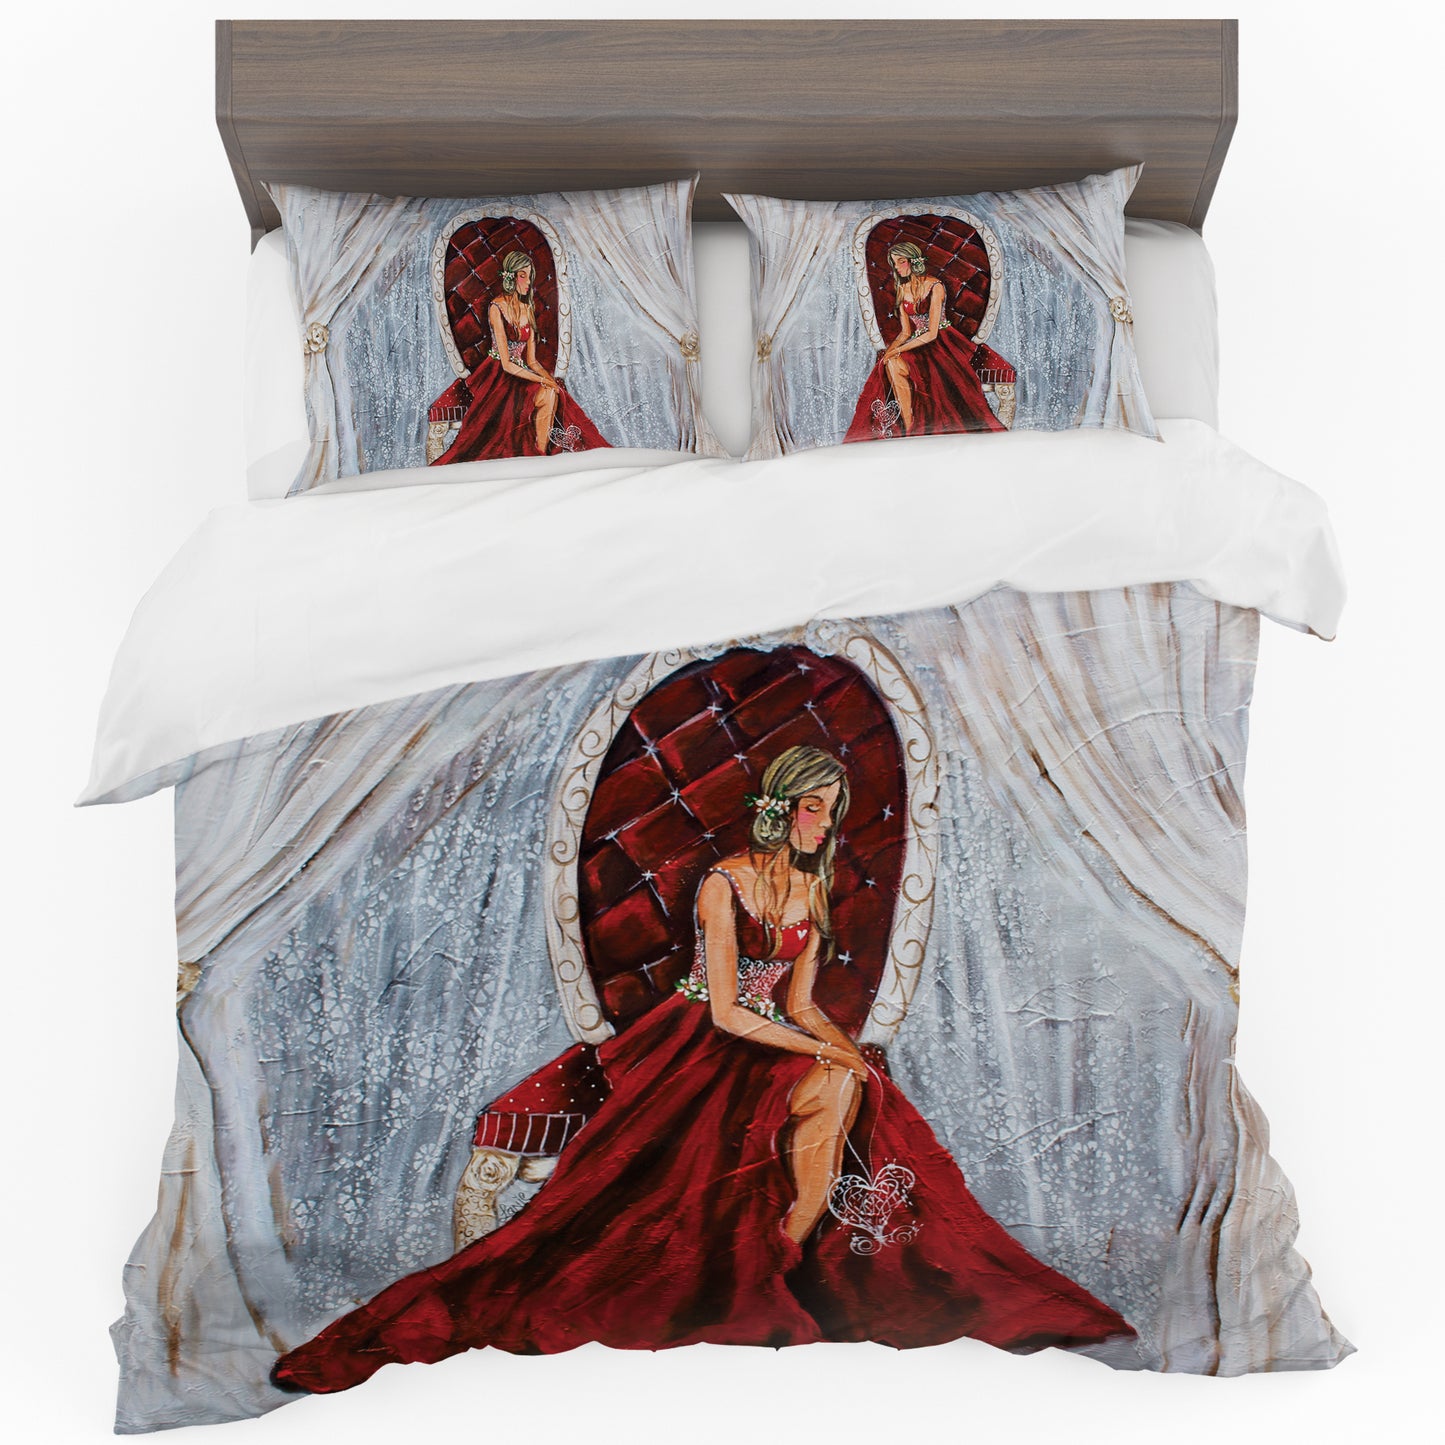 Red Dress Lady Duvet Cover Set by Lanie's Art